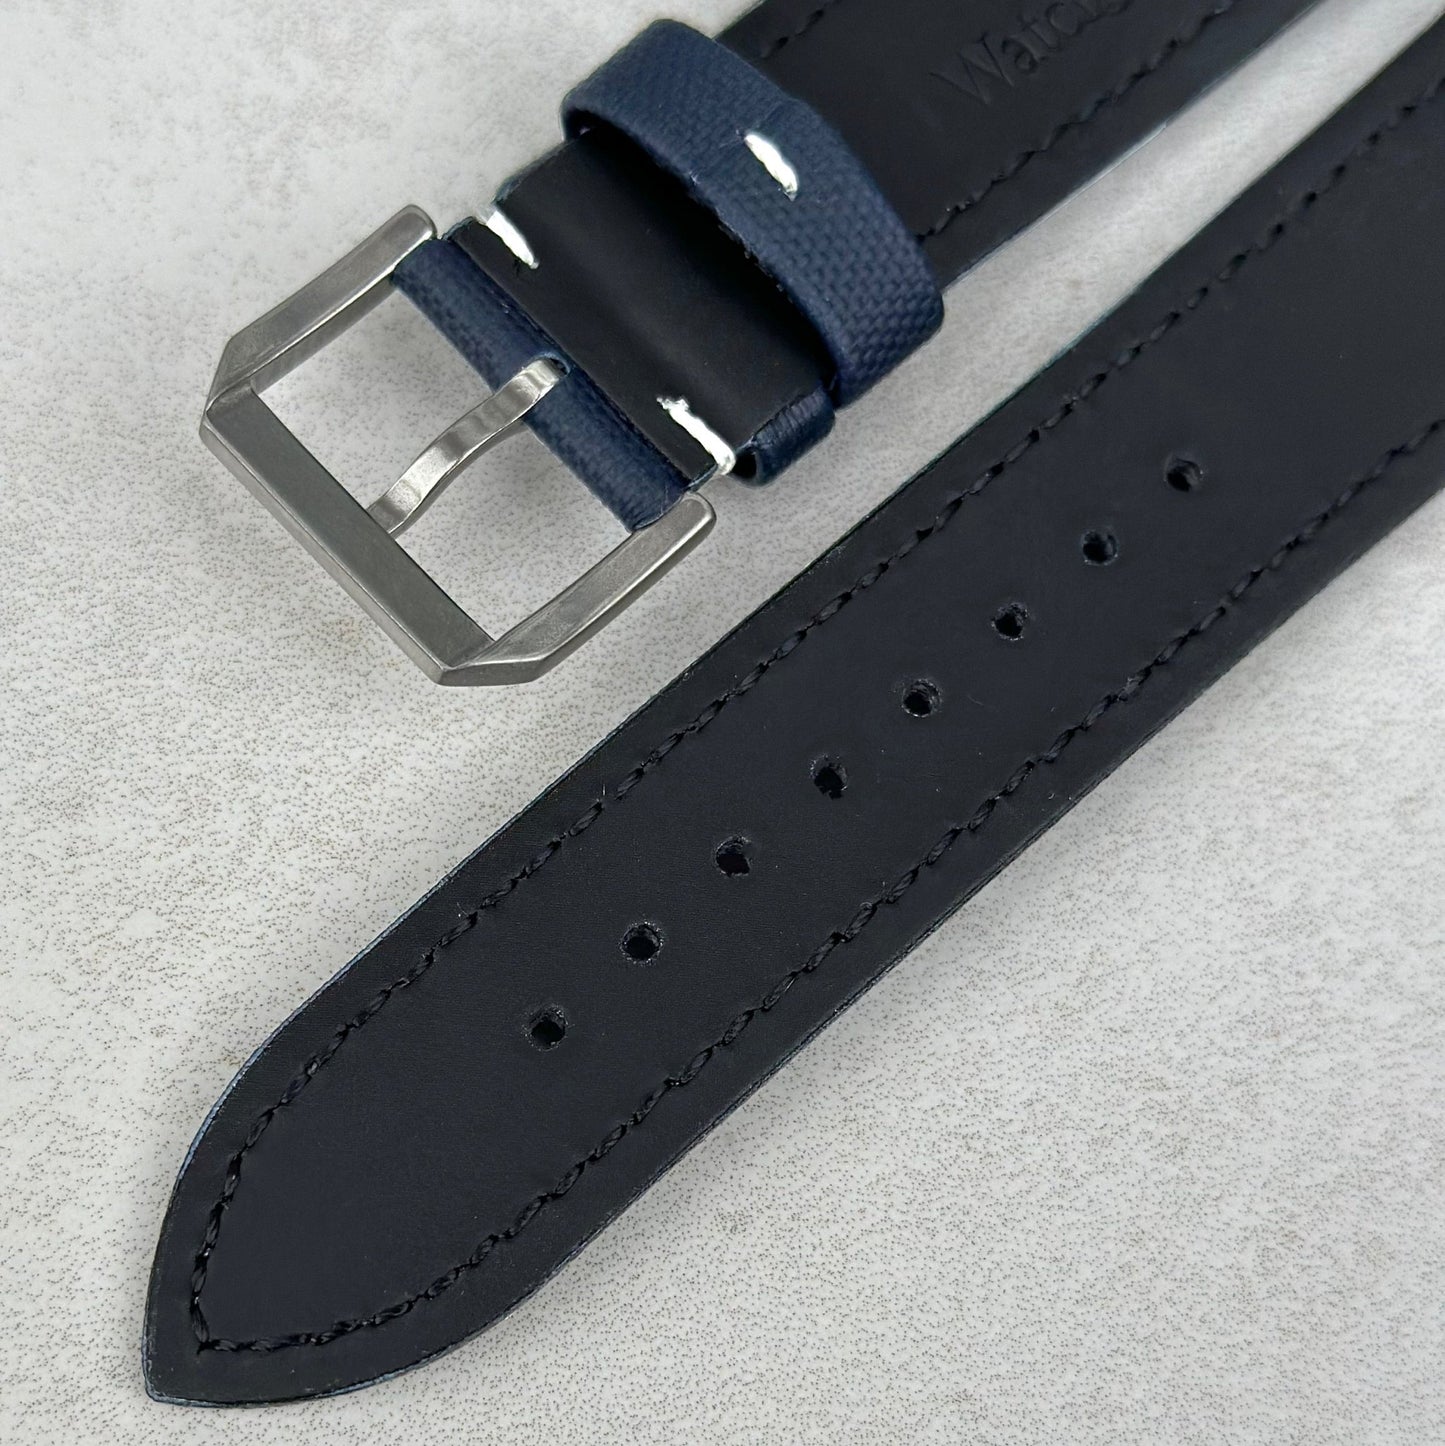 Brushed 316L stainless steel buckle on the navy blue sail cloth Apple Watch strap with white stitching. Watch And Strap